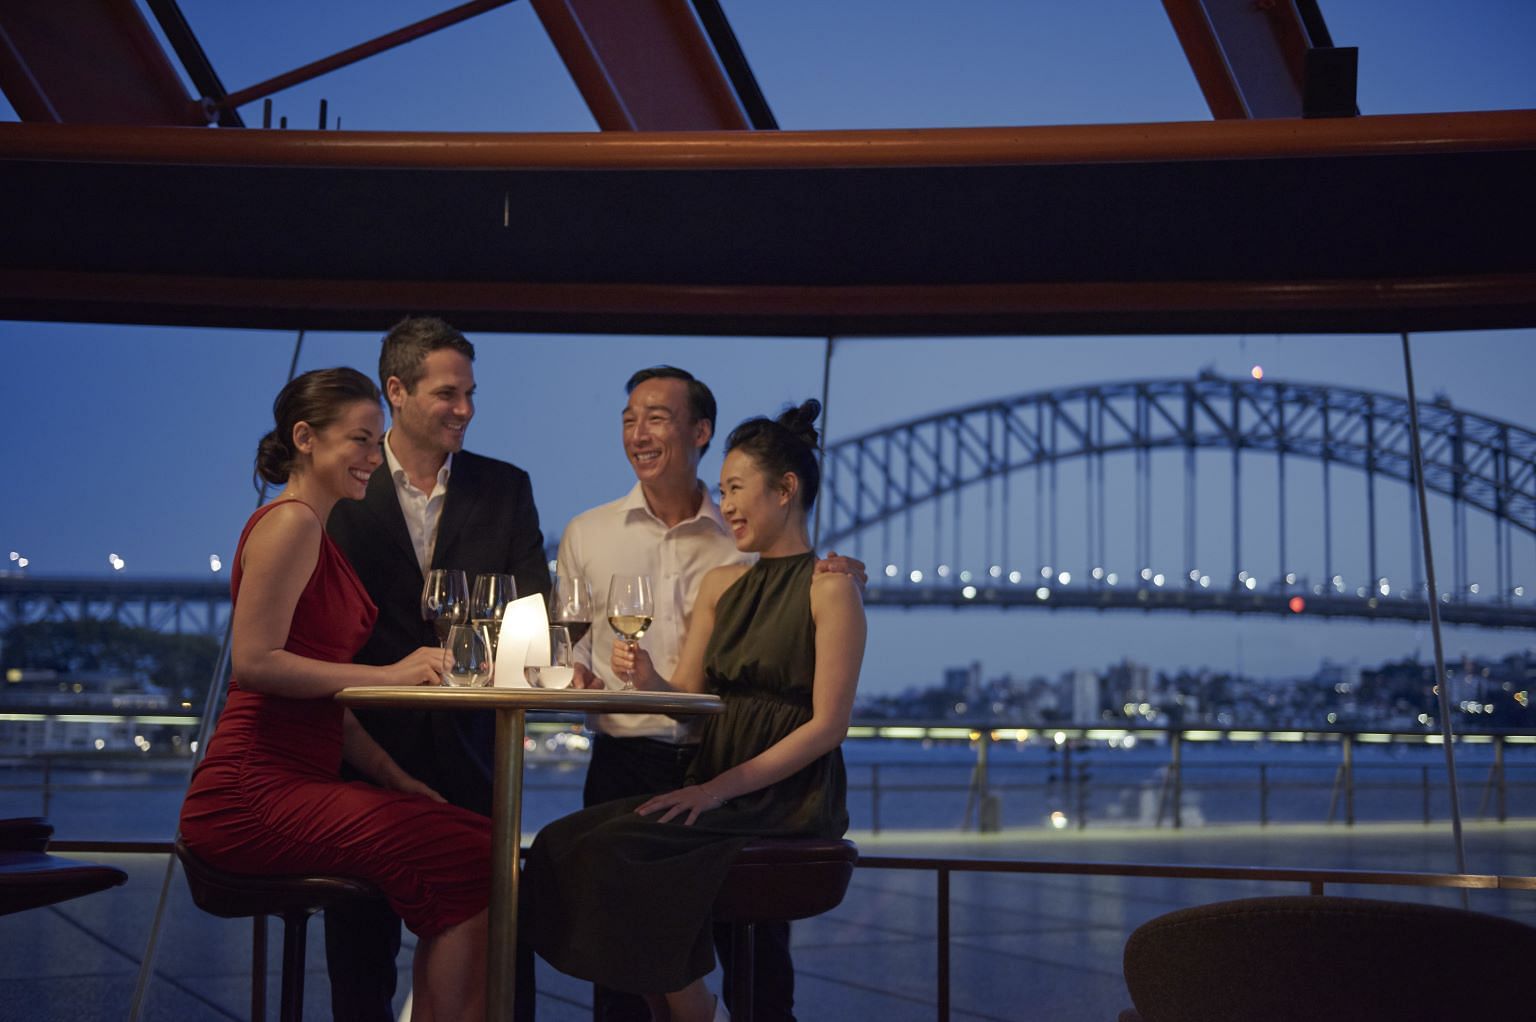 Couples sitting at Bennelong Restaurant enjoying dinner and drinks with the Sydney Harbour Bridge in the background